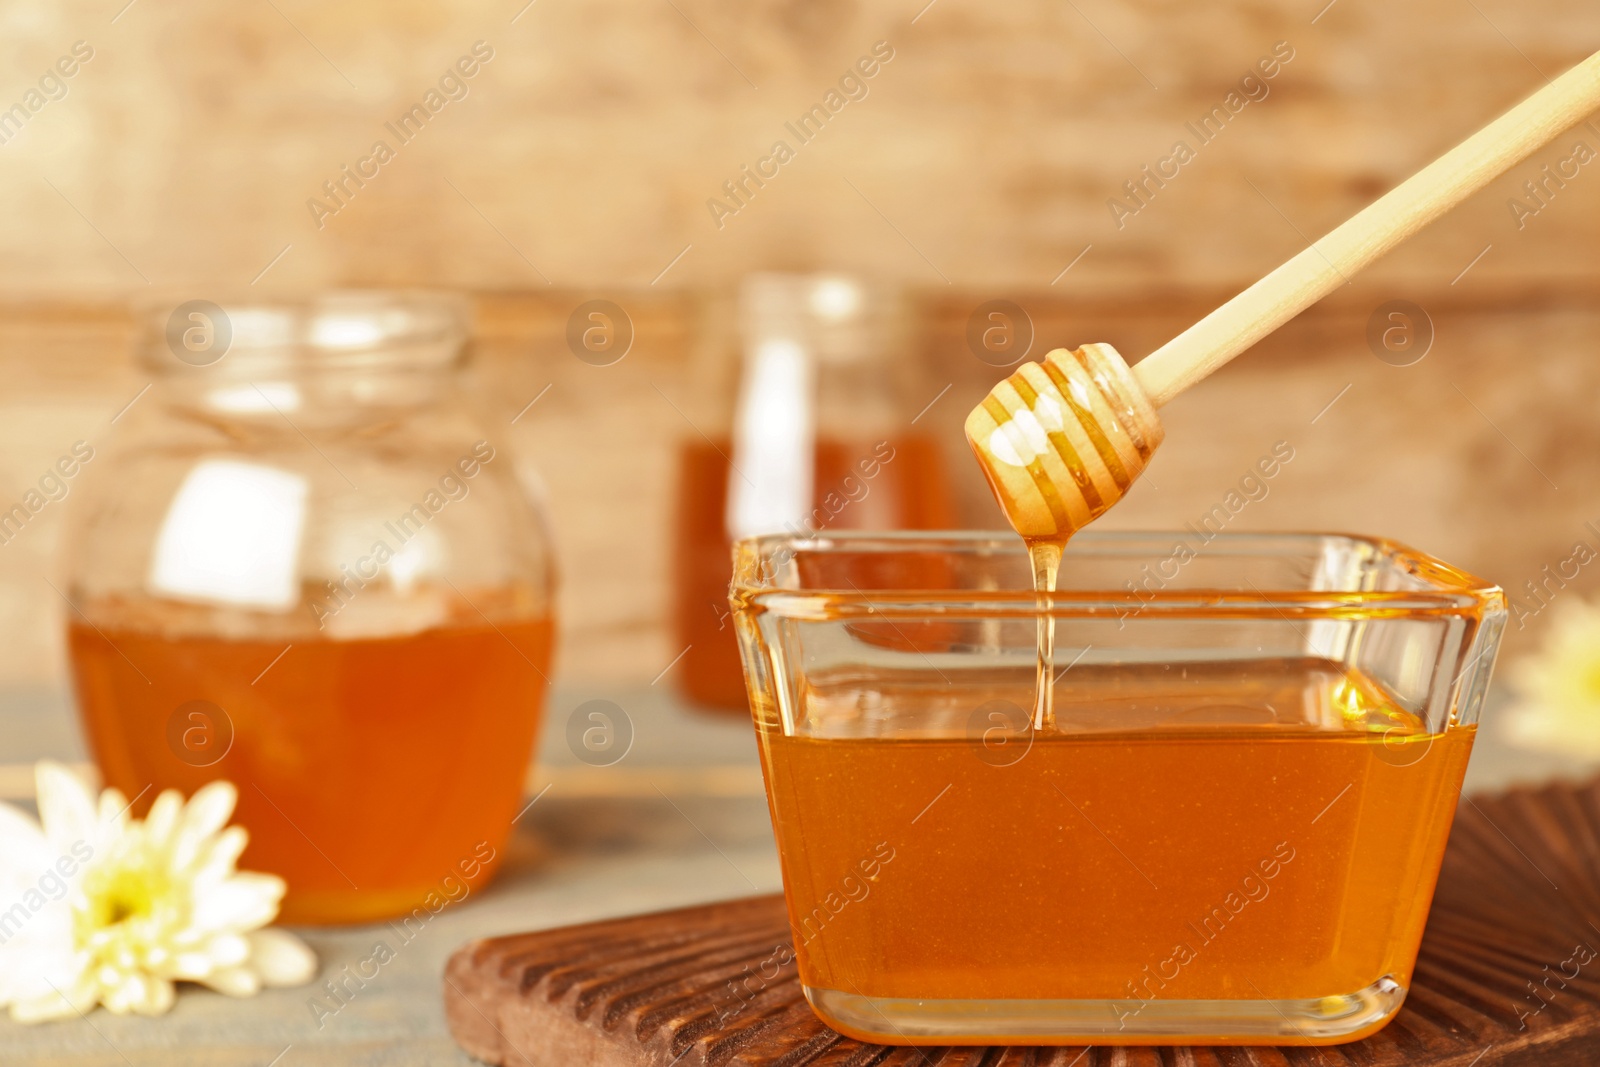 Photo of Honey dripping from dipper into glass bowl on wooden table